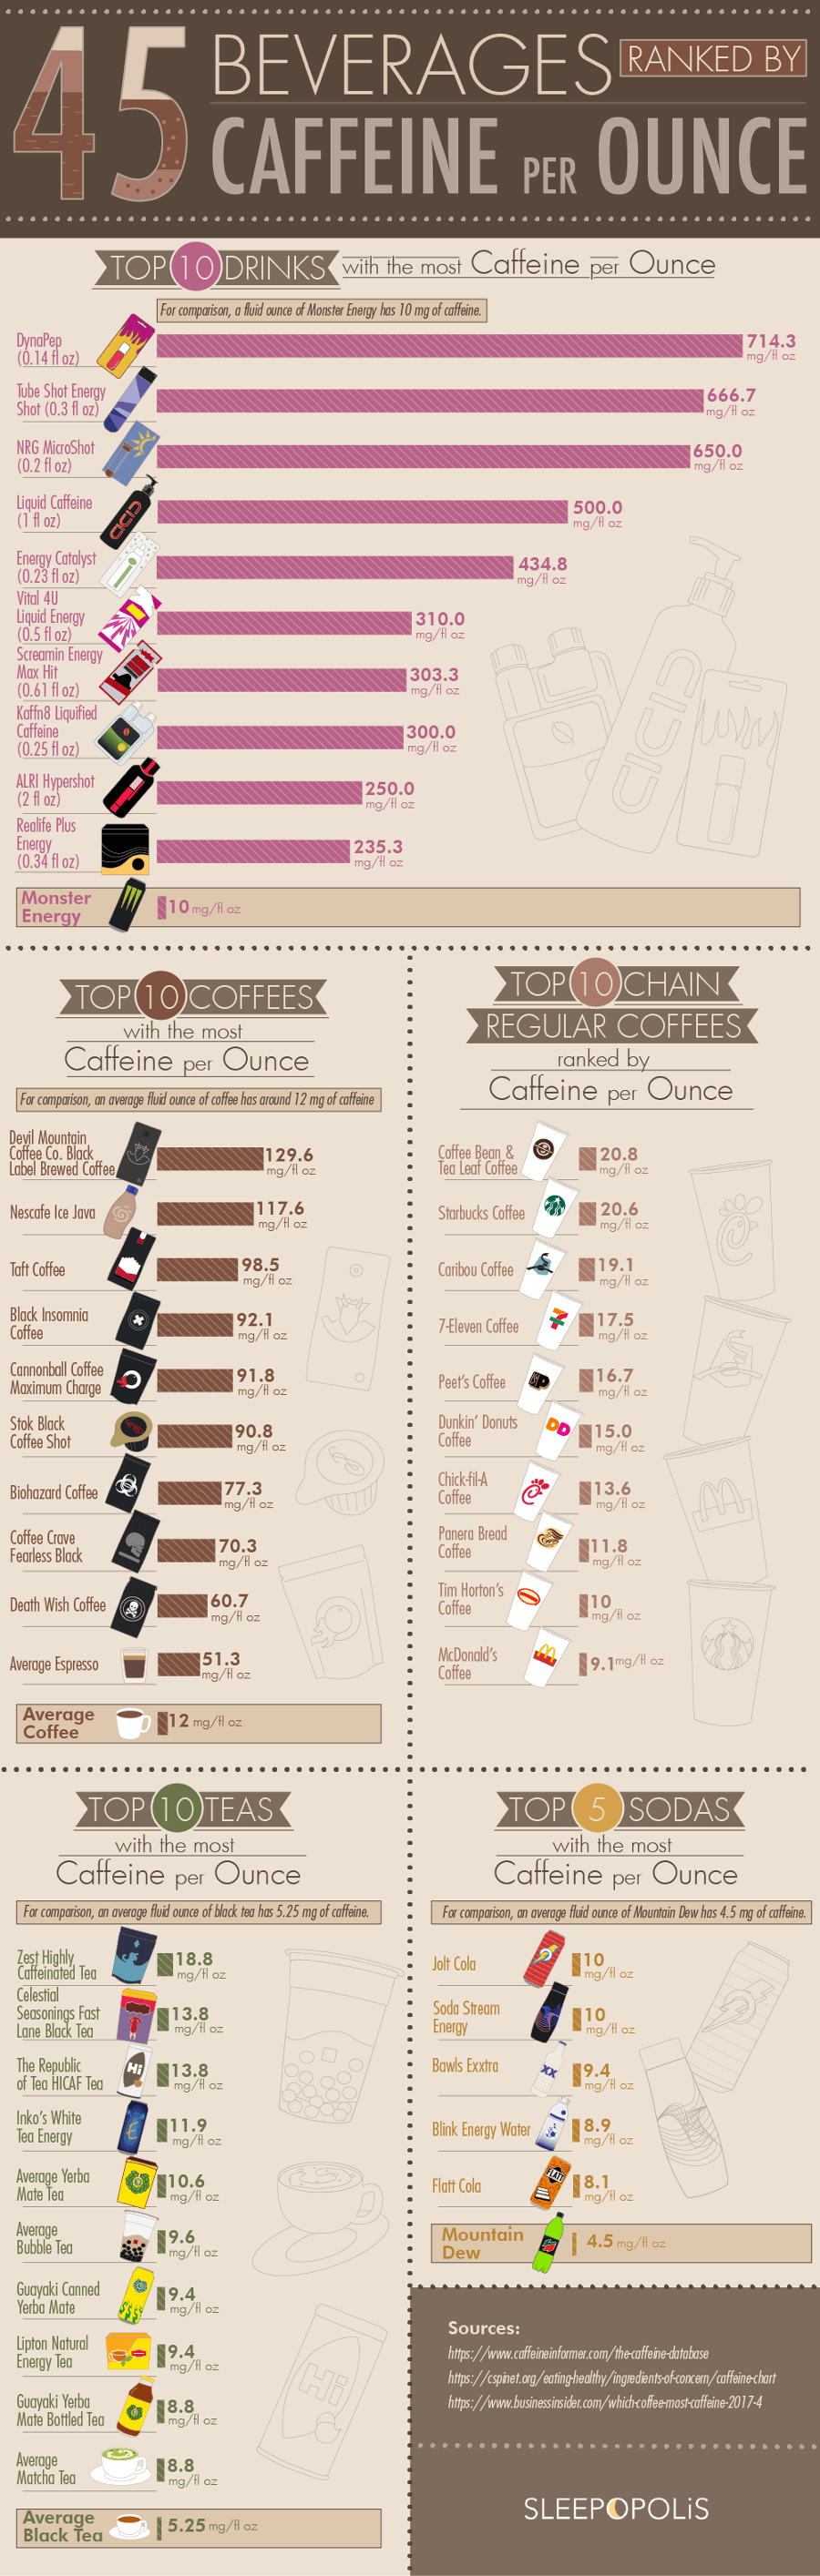 45 beverages ranked by caffeine per ounce